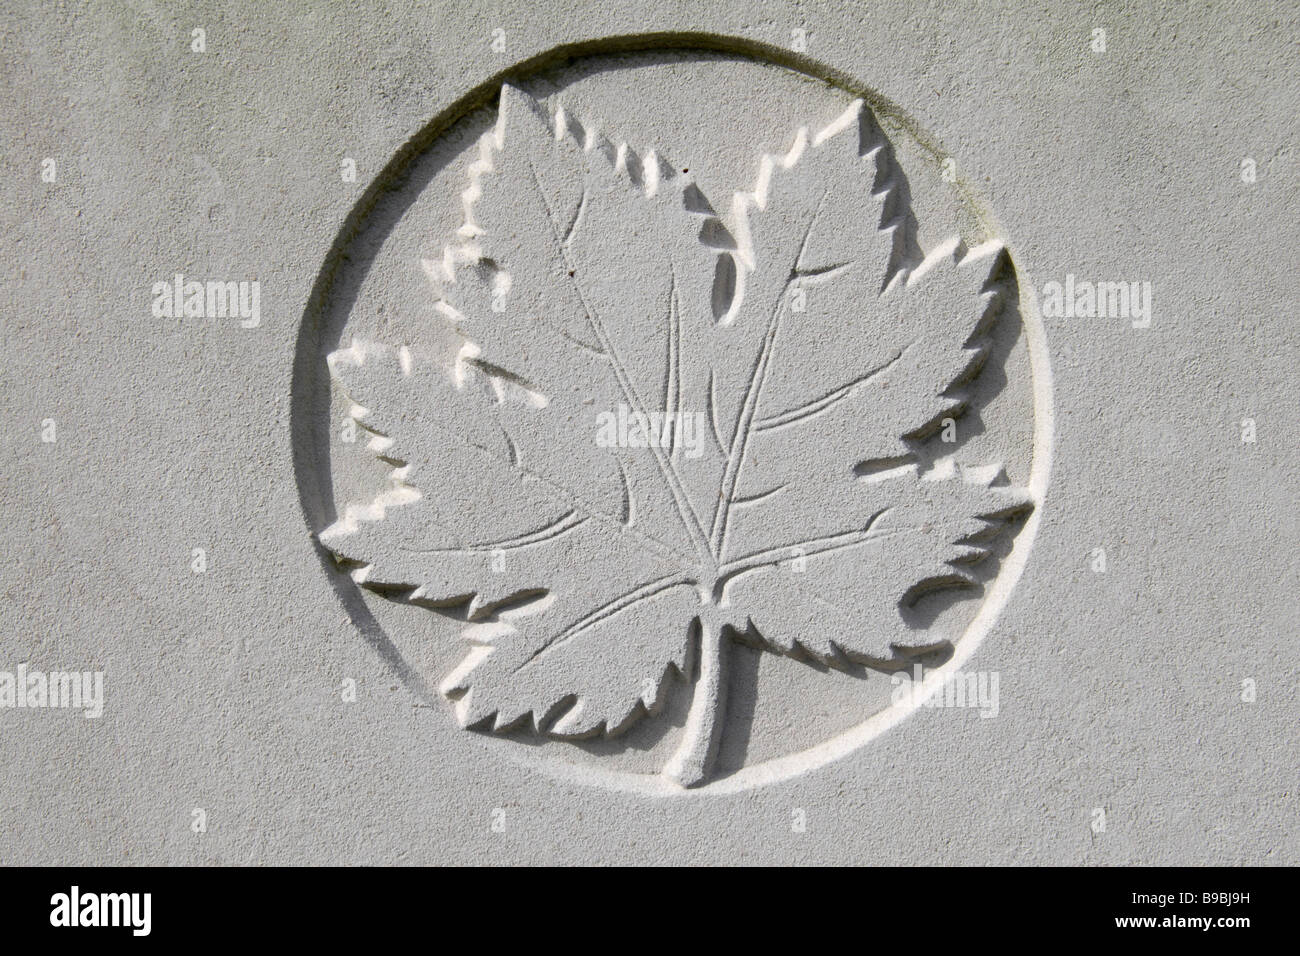 The Canadian emblem which appears on all headstones in Commonwealth War cemeteries around the world. Stock Photo